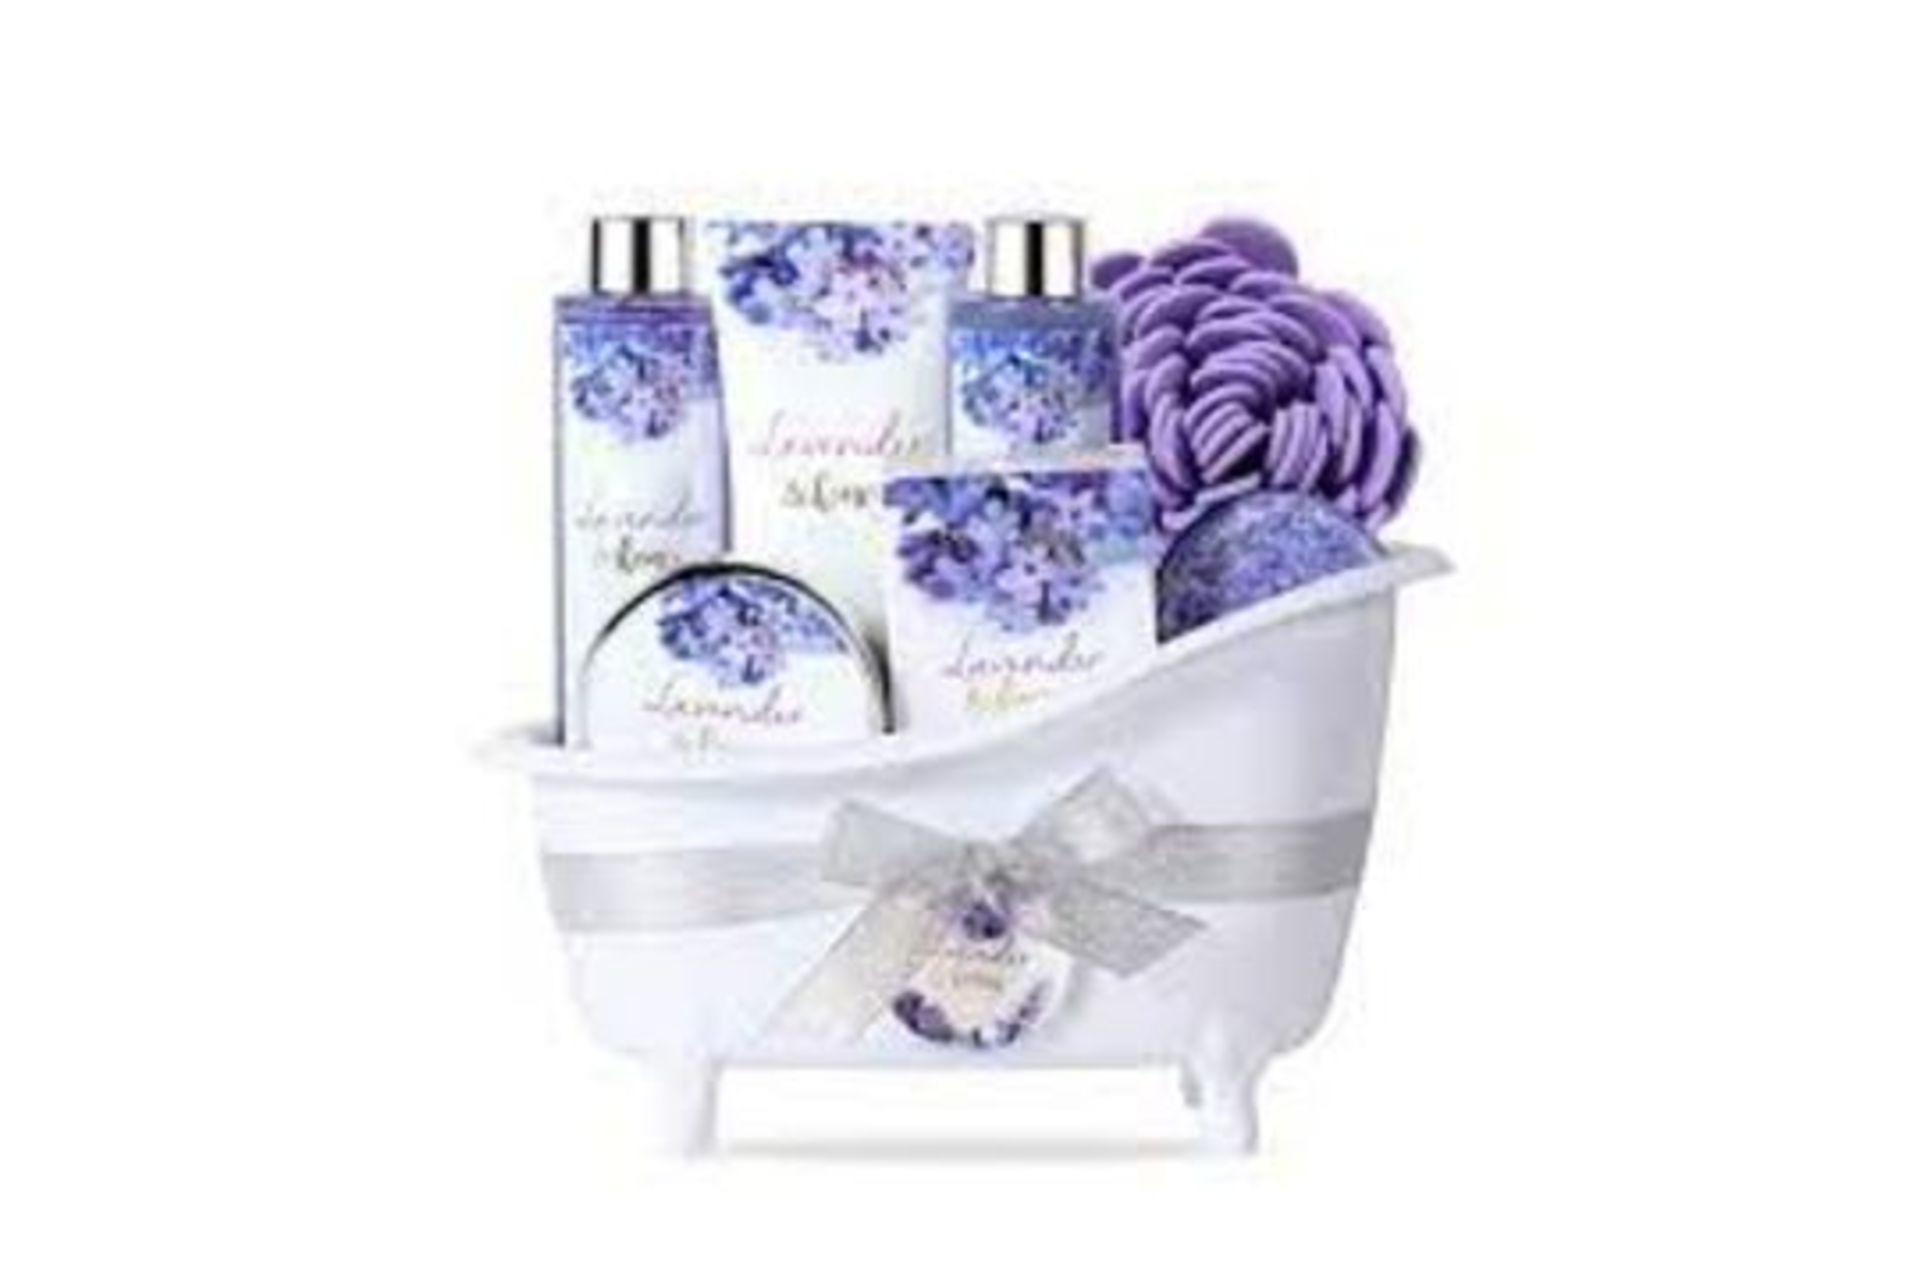 6 X NEW PACKAGED BODY & EARTH Lavender & Honey Spa Bathtub Set. (AMABE-3-1) Contents: This bath